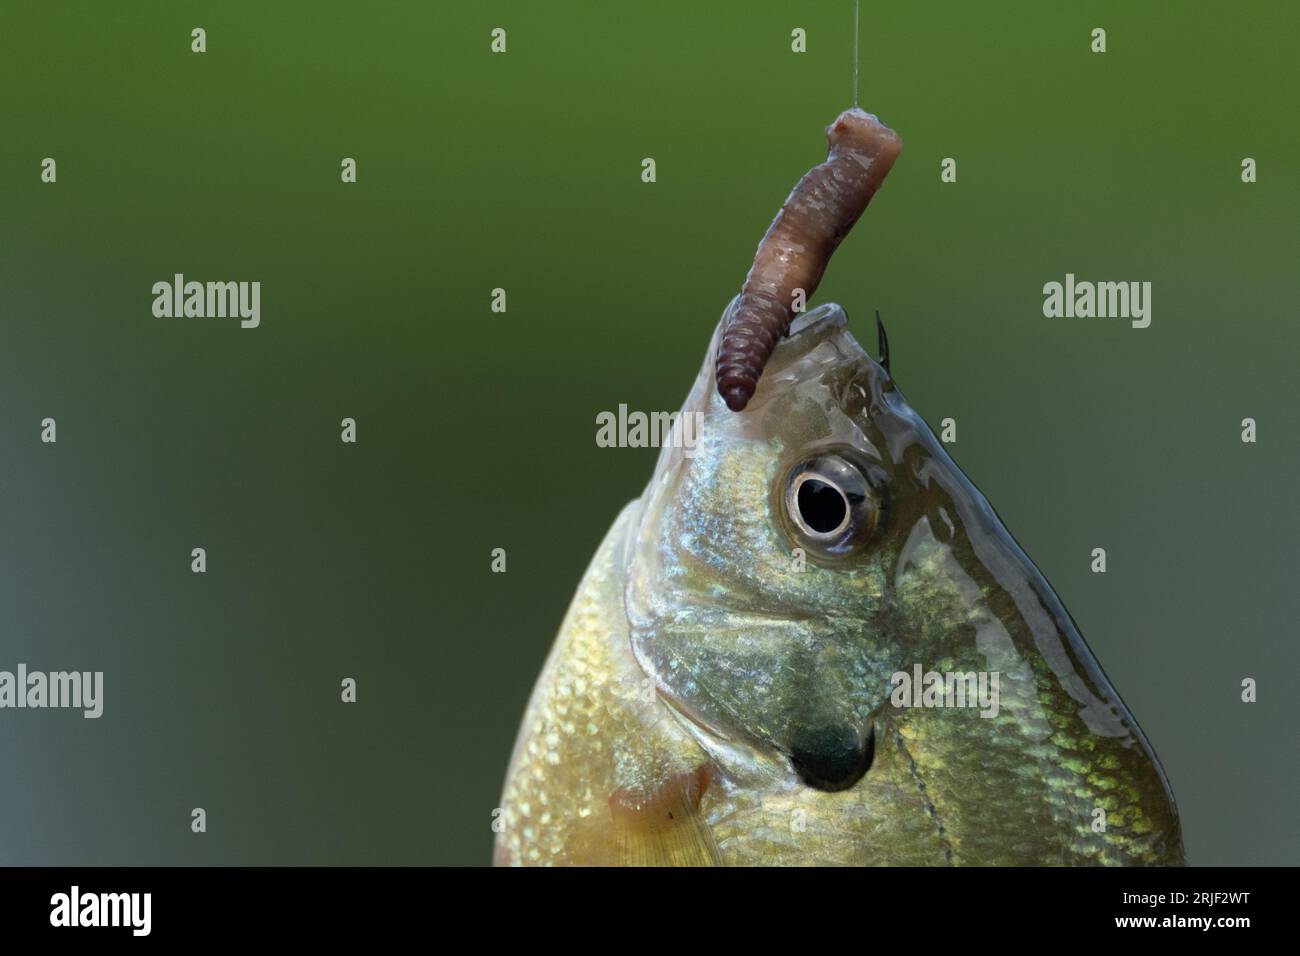 Close up view of bluegill fish with worm and hook in mouth Stock